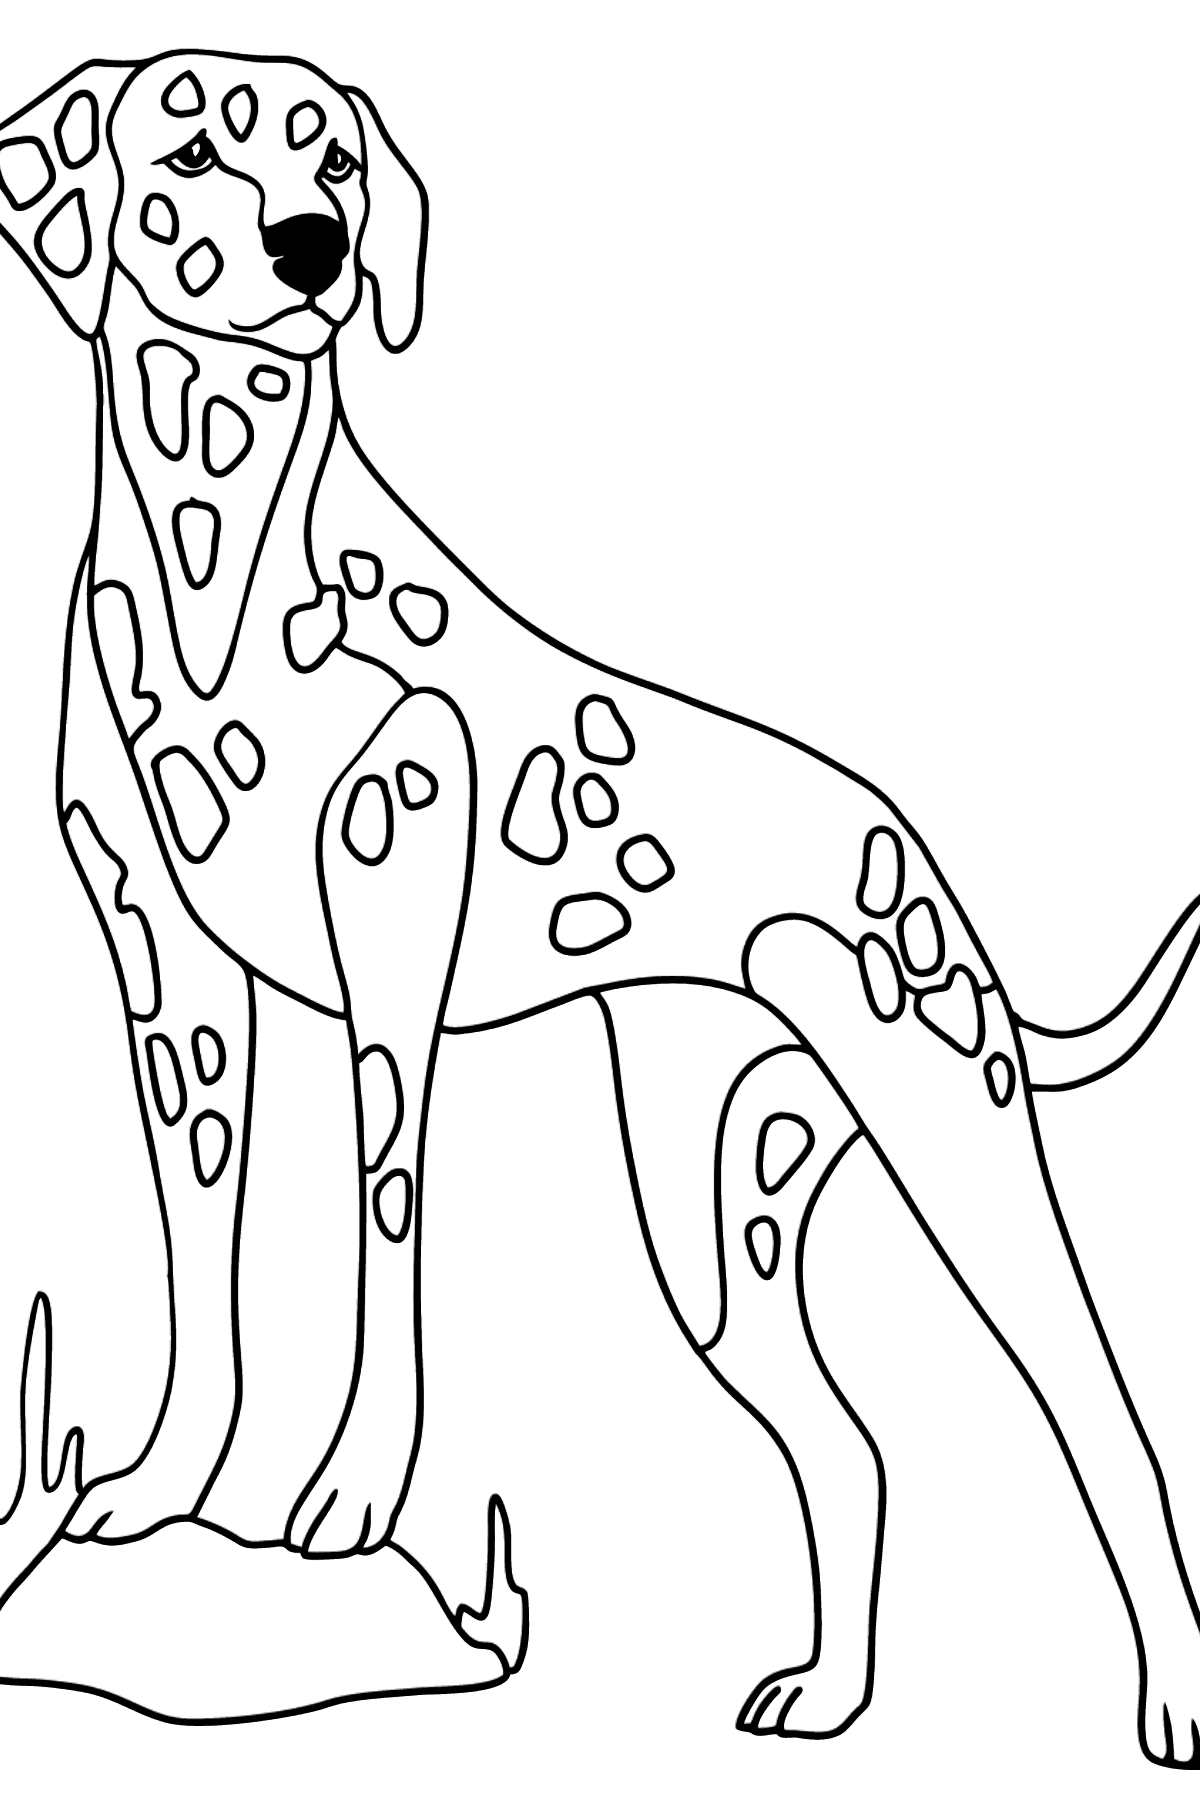 Dalmatian coloring page - Coloring Pages for Kids